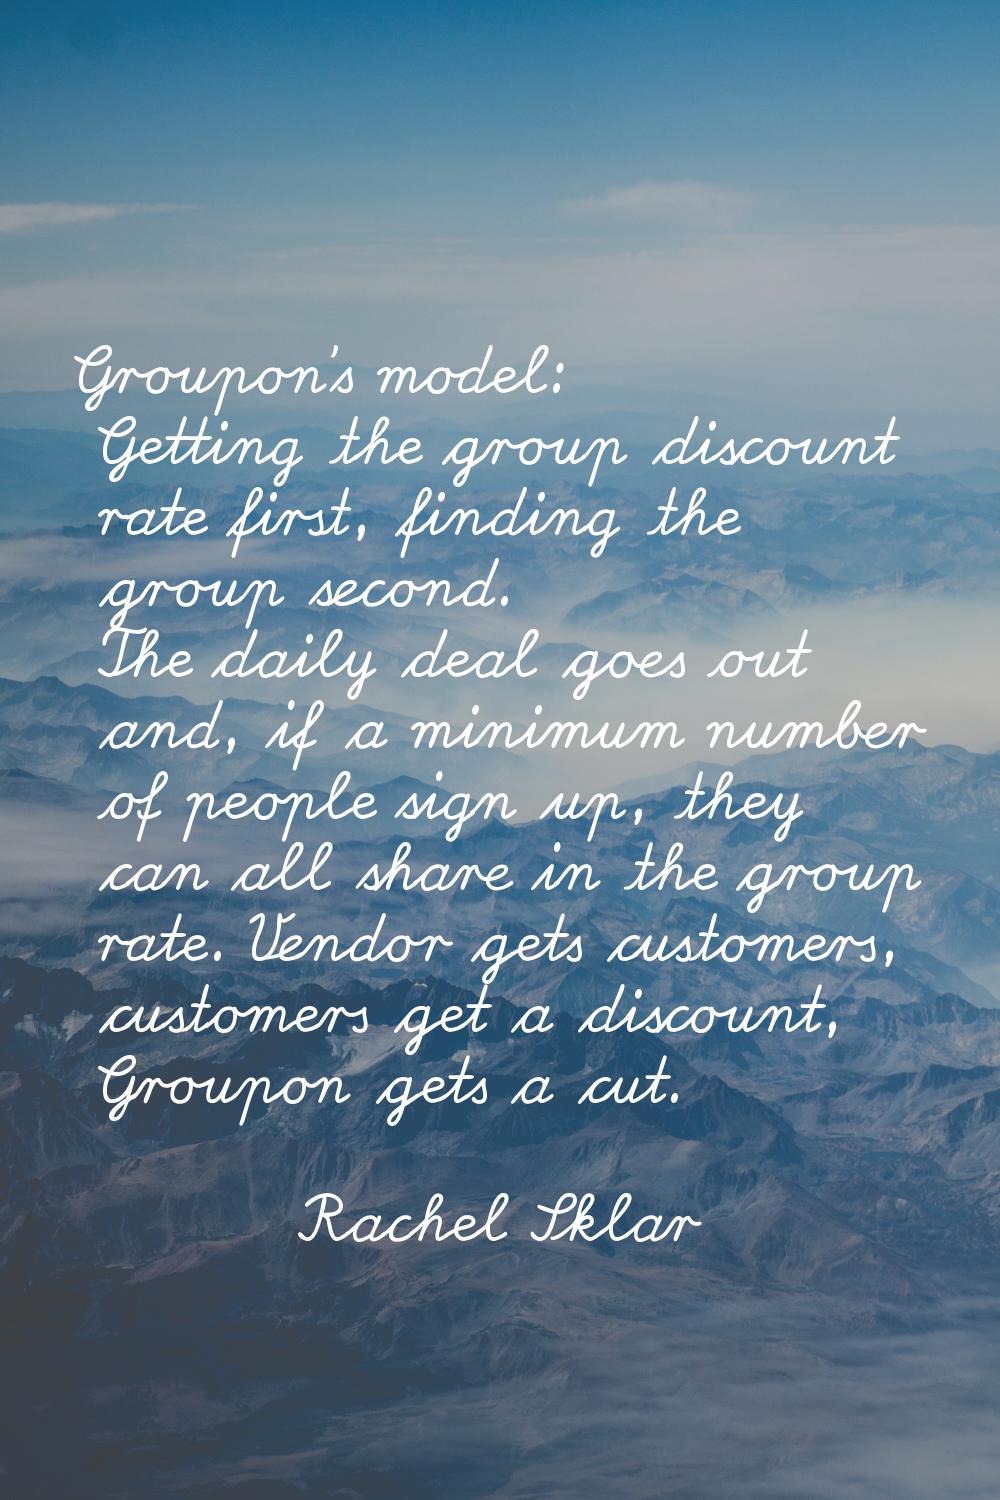 Groupon's model: Getting the group discount rate first, finding the group second. The daily deal go